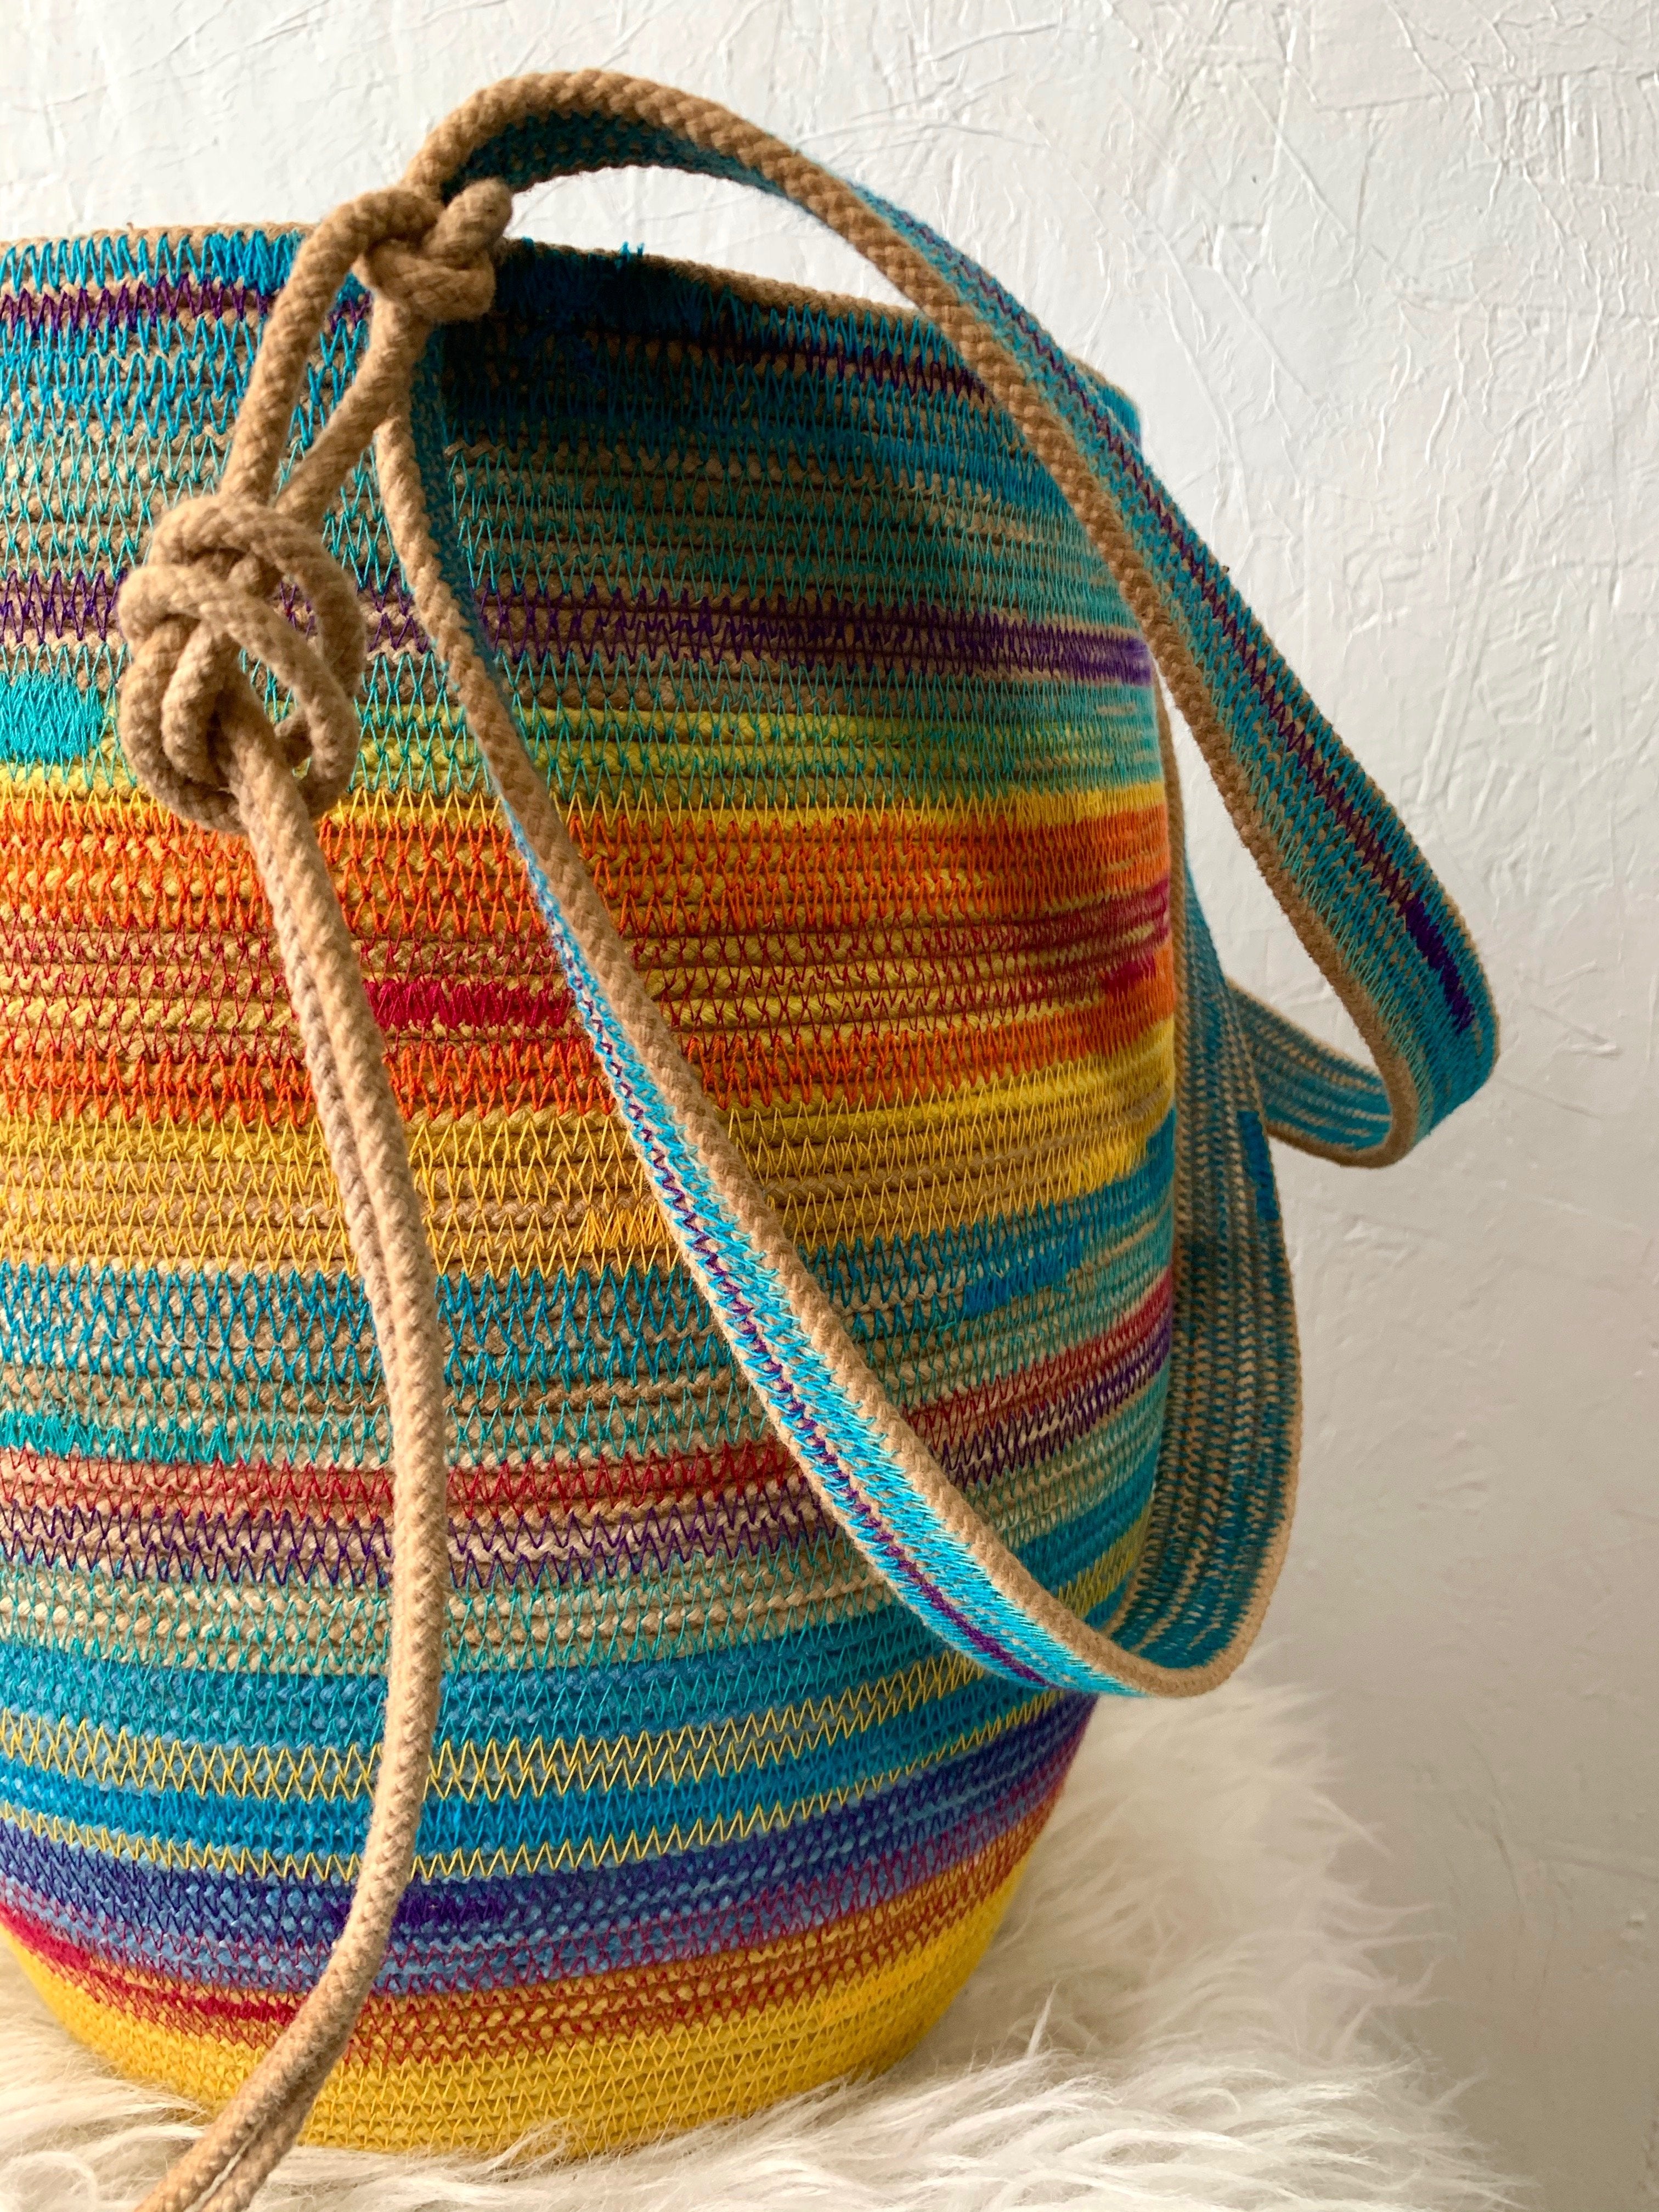 naturally dyed rope basket